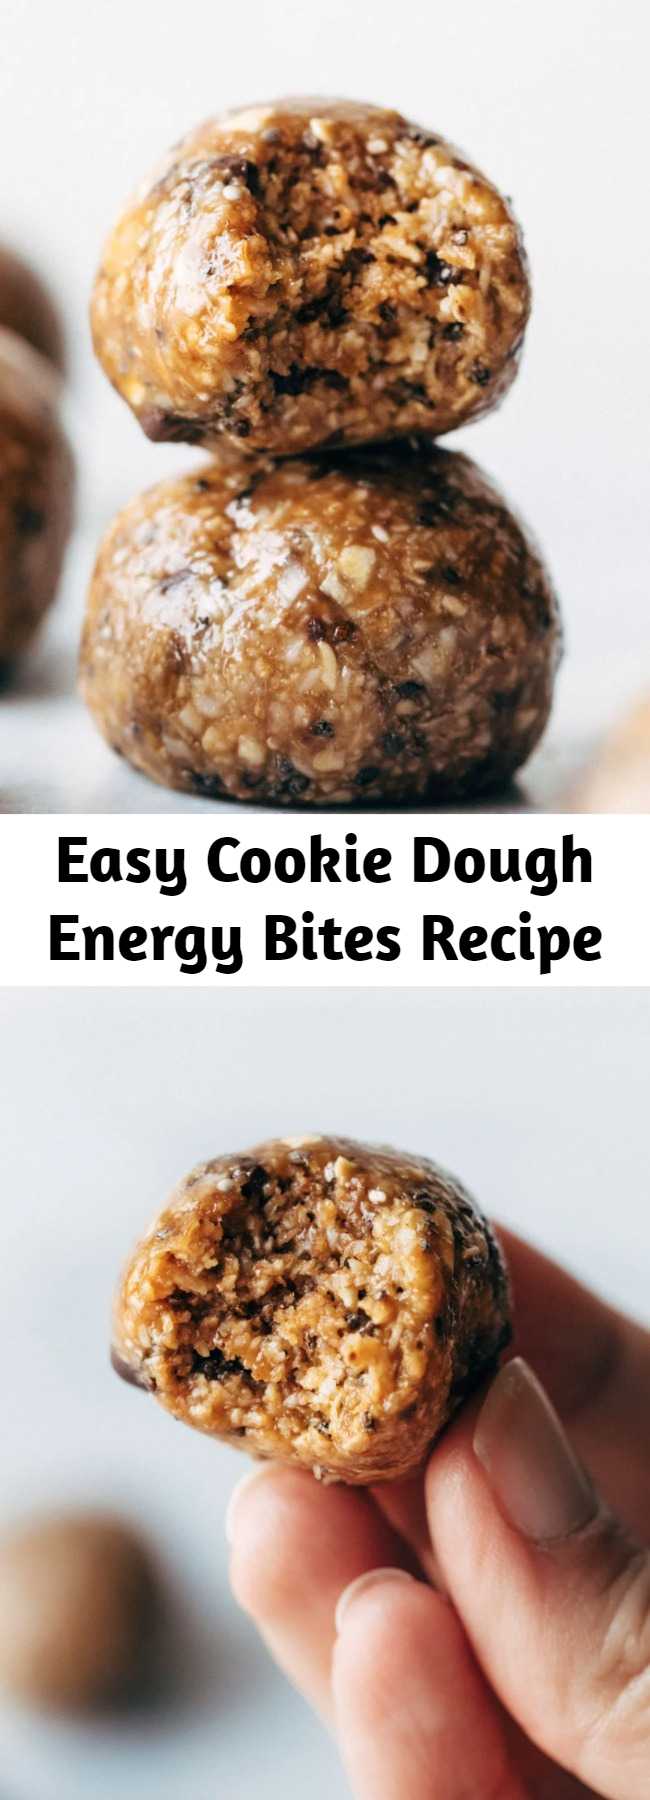 Easy Cookie Dough Energy Bites Recipe - Nutritious, wholesome, full of goodness AND TASTES LIKE COOKIE DOUGH. No Bake Cookie Dough Energy Bites for the win! Love these little bites! #healthy #nobake #energybites #cookiedough